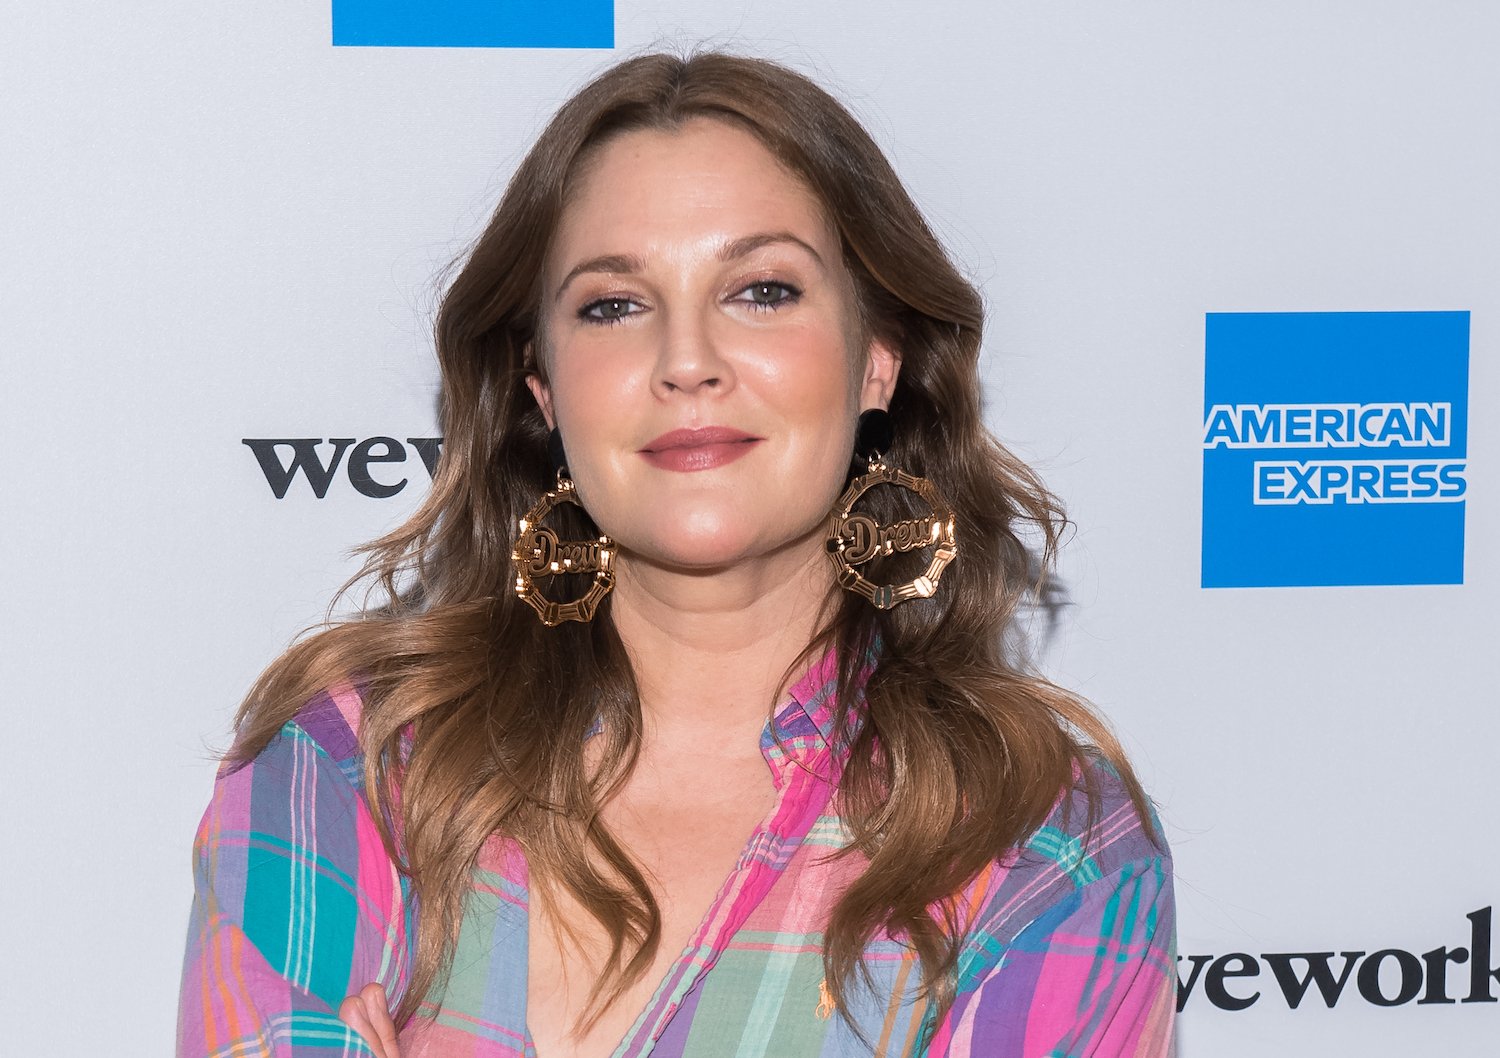 Drew Barrymore wears a colorful shirt on the red carpet of the American Express and WeWork 'For the Love of Collaboration' event in 2019